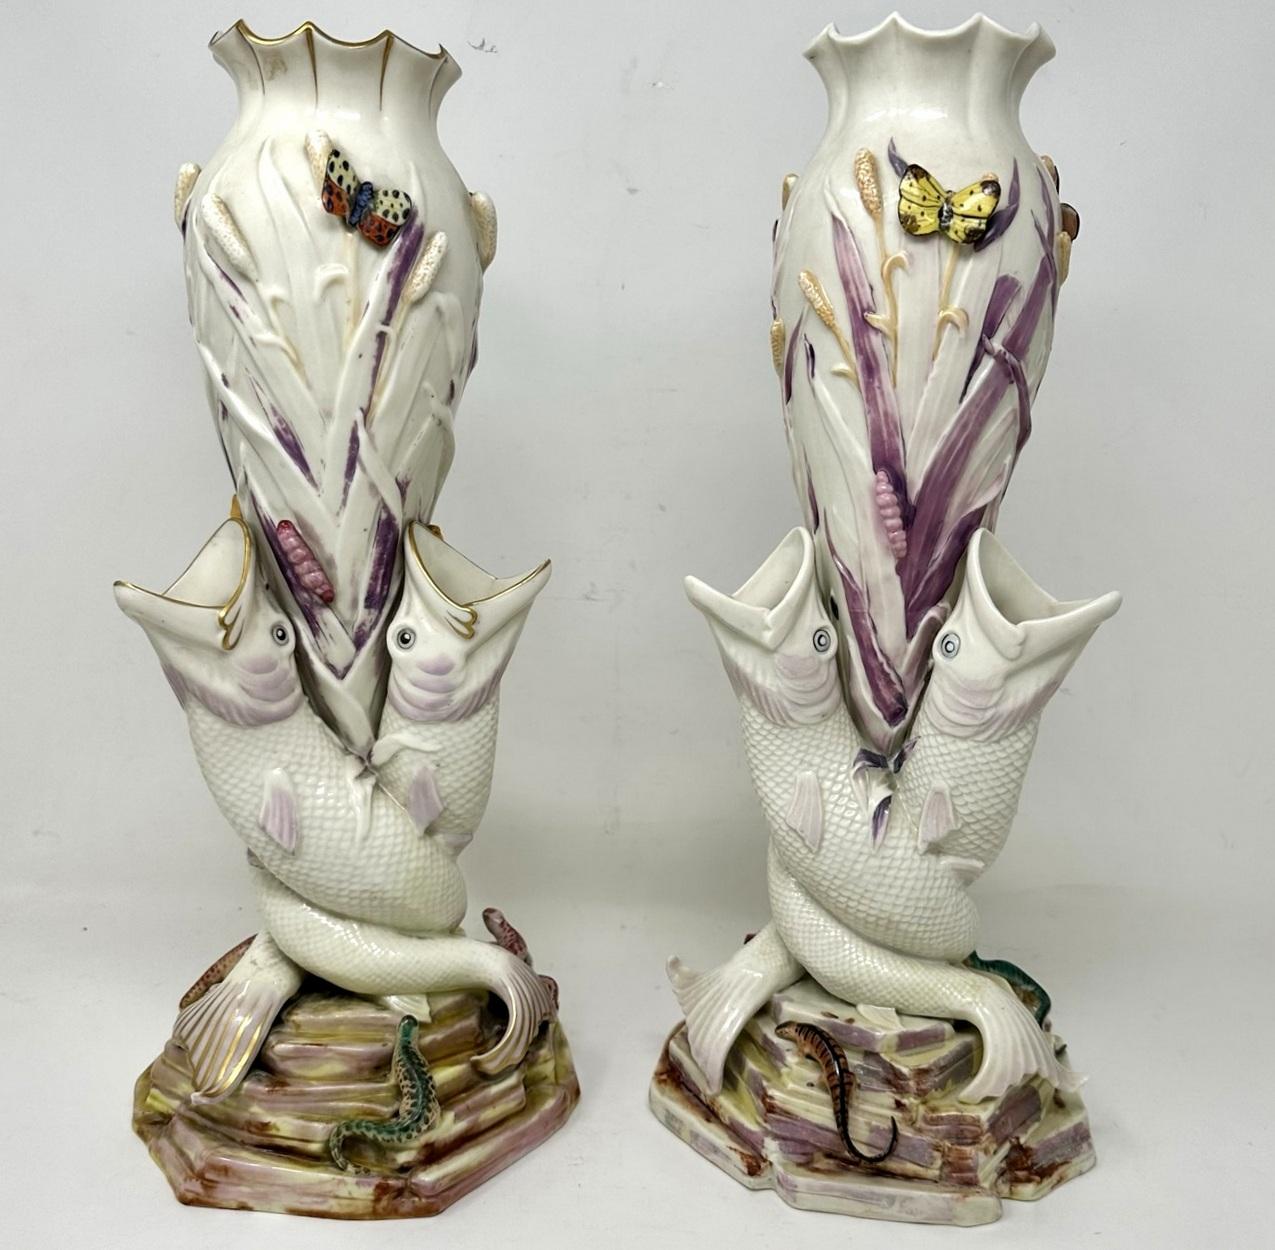 An extremely rare Pair of Irish Belleek Porcelain Victorian “Triple Fish Vases” of Museum quality and very large proportions. First period black mark for 1863 to 1890.  

Each baluster formed vase with waisted fluted decorative rim is raised on